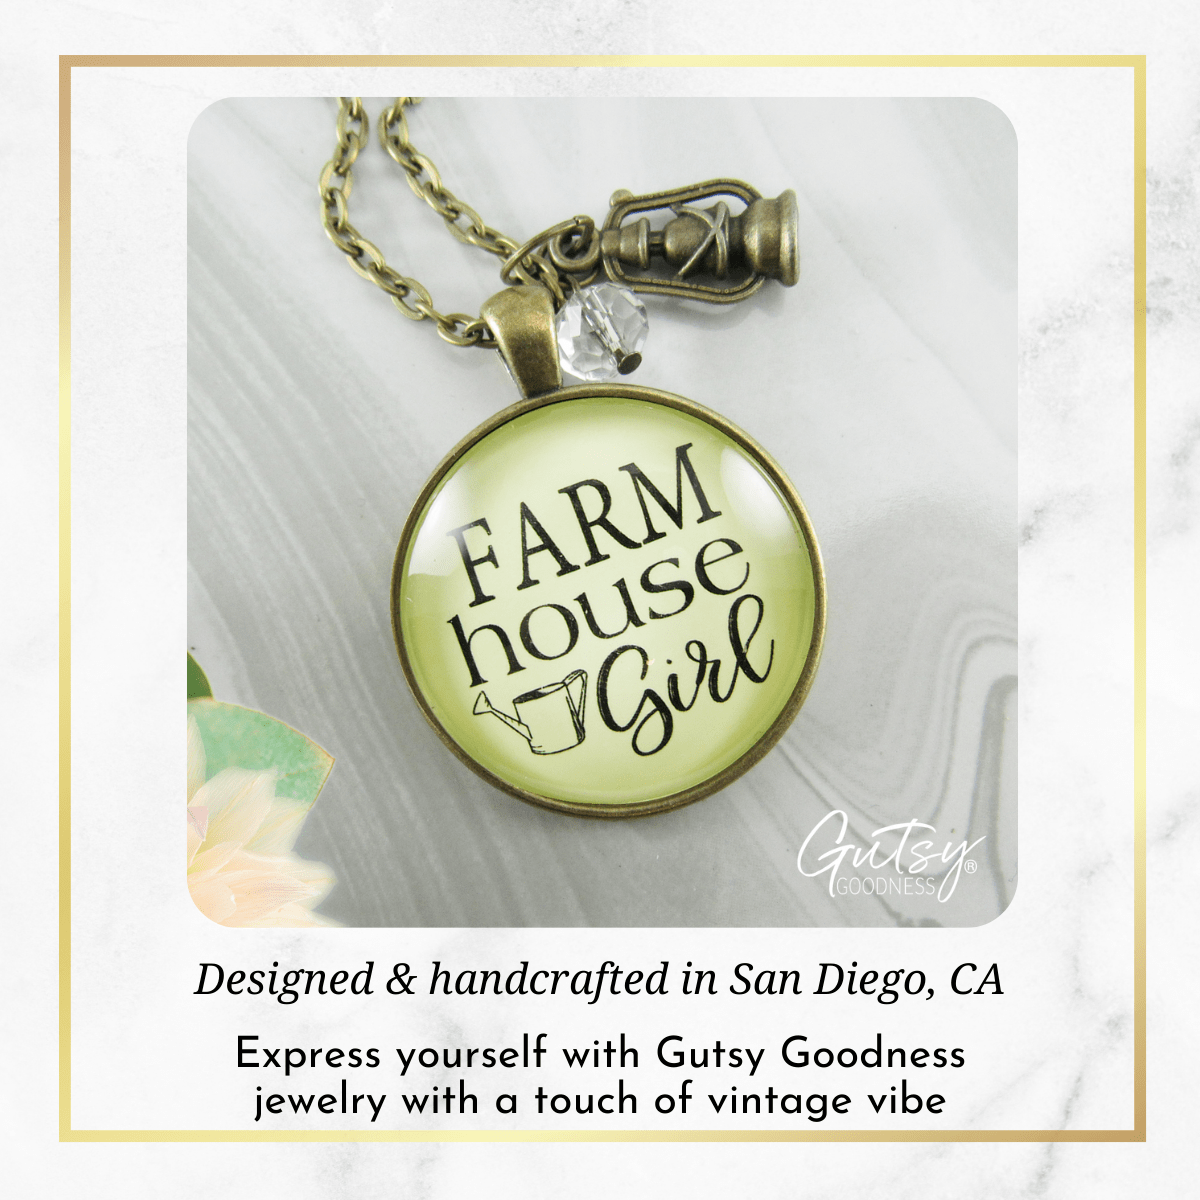 Gutsy Goodness Farmhouse Necklace Southern Charm Jewelry Oil Lamp Charm - Gutsy Goodness Handmade Jewelry;Farmhouse Necklace Southern Charm Jewelry Oil Lamp Charm - Gutsy Goodness Handmade Jewelry Gifts